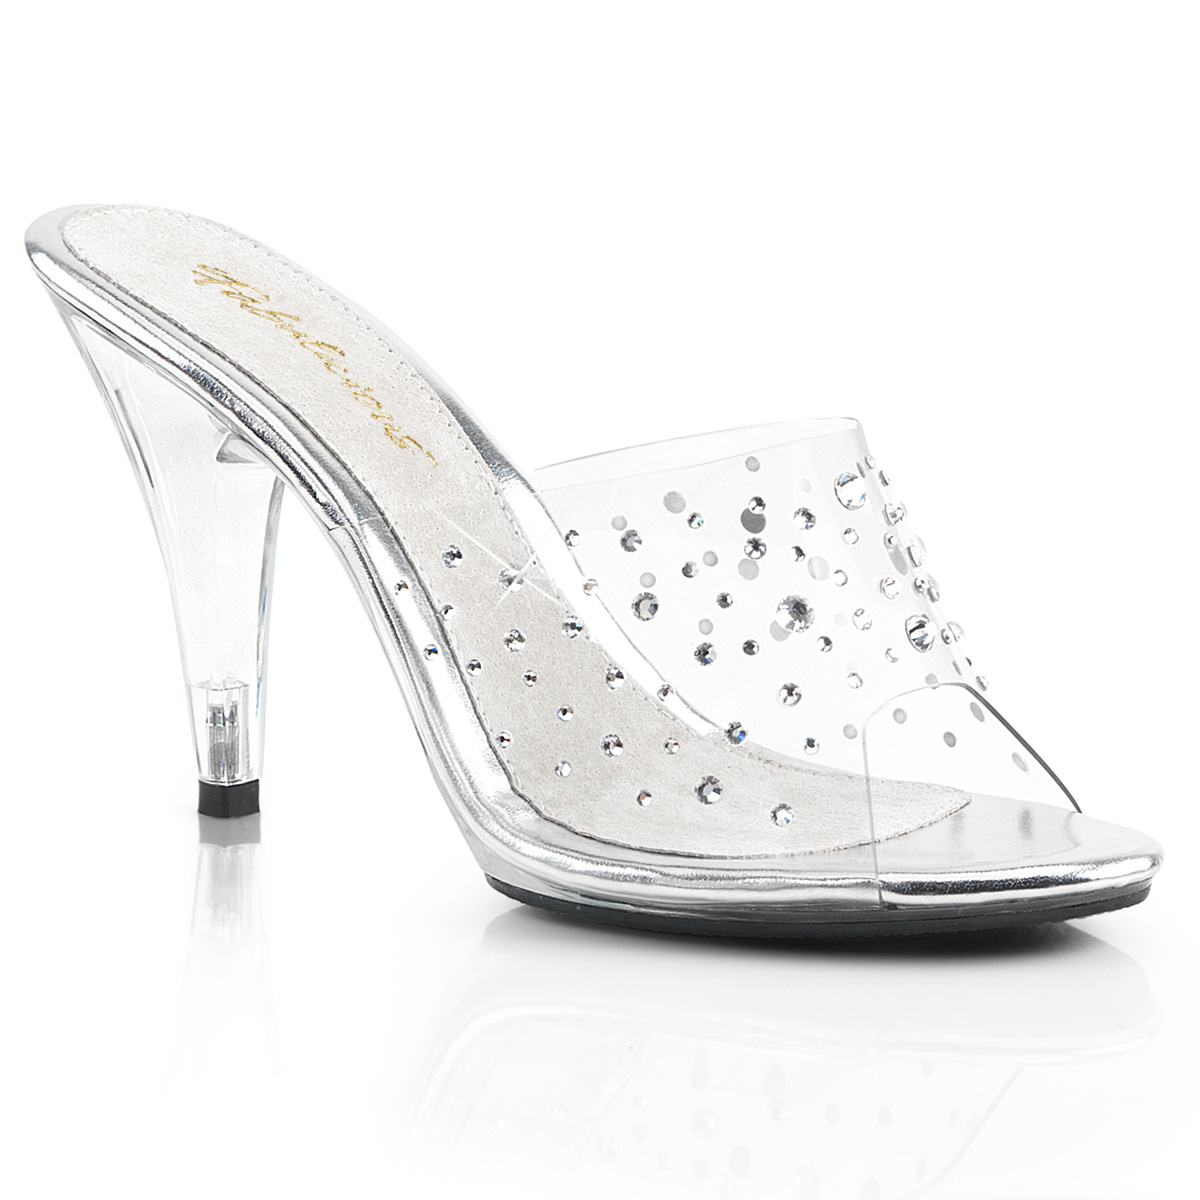 Fabulicious Caress-401rs Shoes Clear Slide Slip on HEELS Open PEEP Toe ...